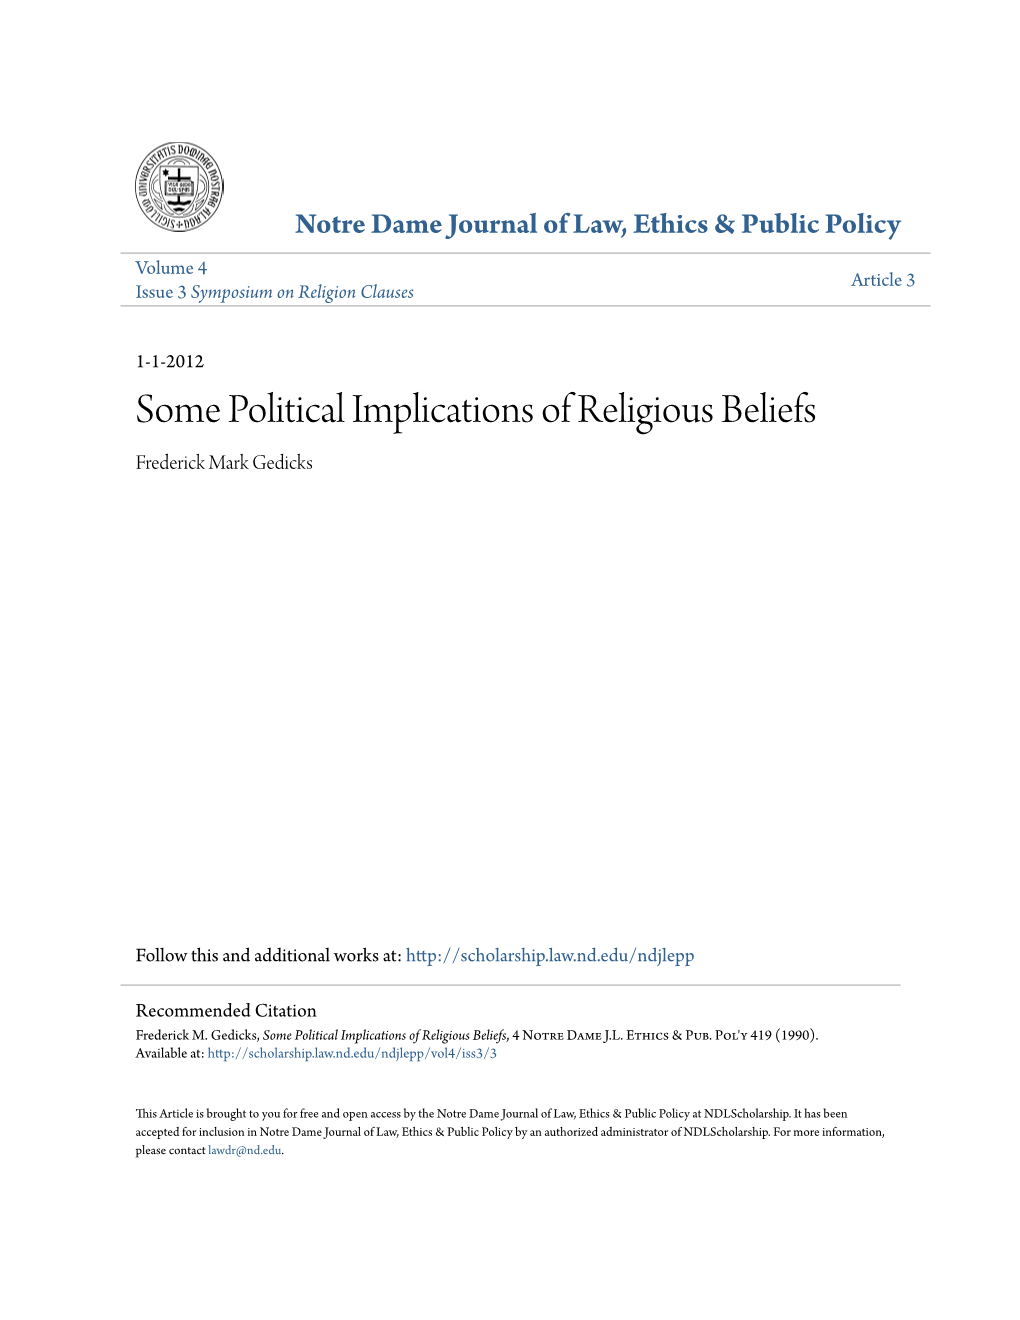 Some Political Implications of Religious Beliefs Frederick Mark Gedicks